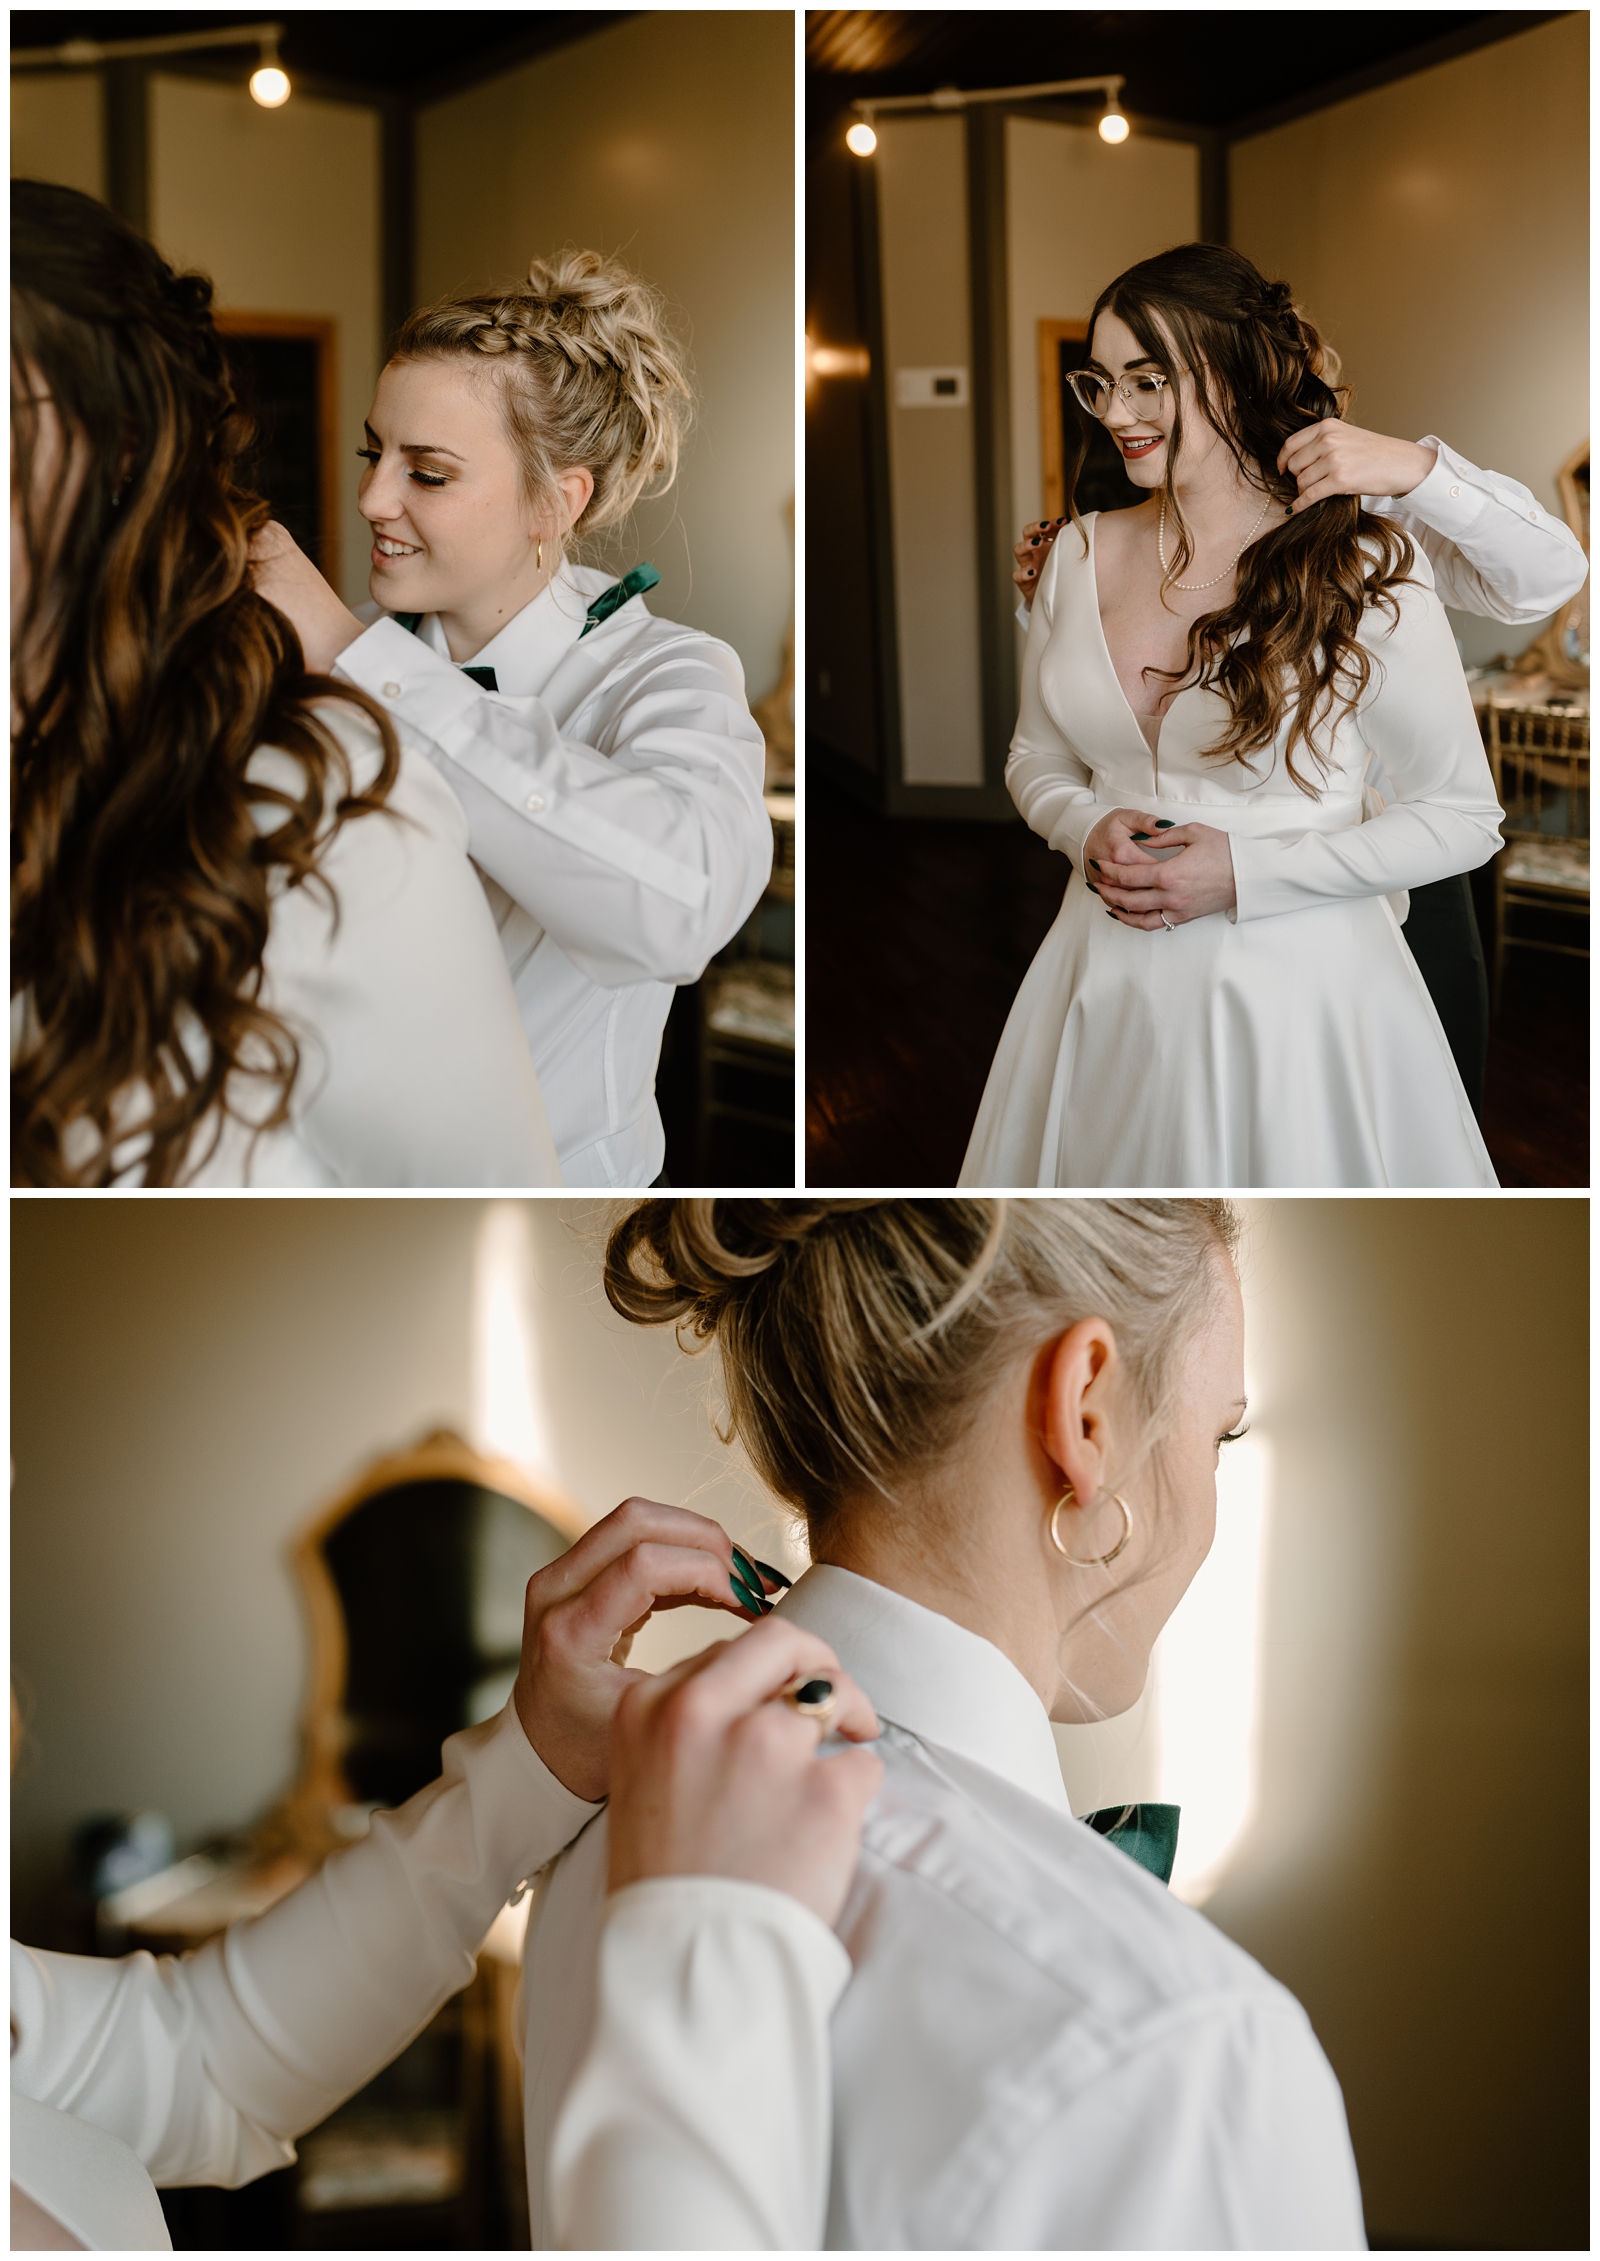 The brides helping each other get ready for their same-sex elopement at Bakery 1818 by Greensboro NC wedding photographer